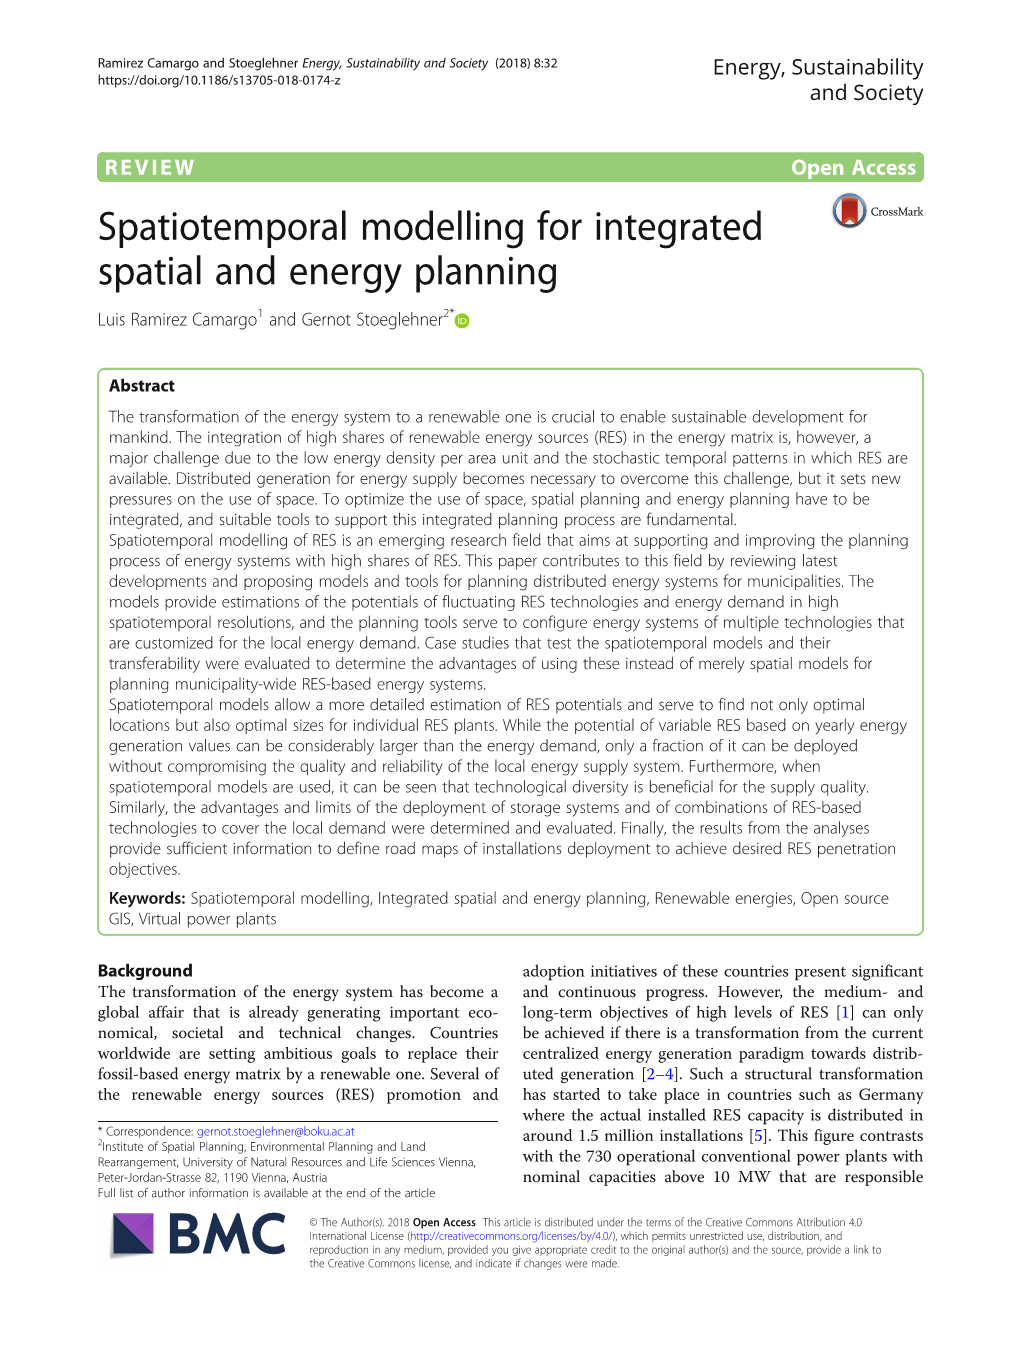 Spatiotemporal Modelling for Integrated Spatial and Energy Planning Luis Ramirez Camargo1 and Gernot Stoeglehner2*